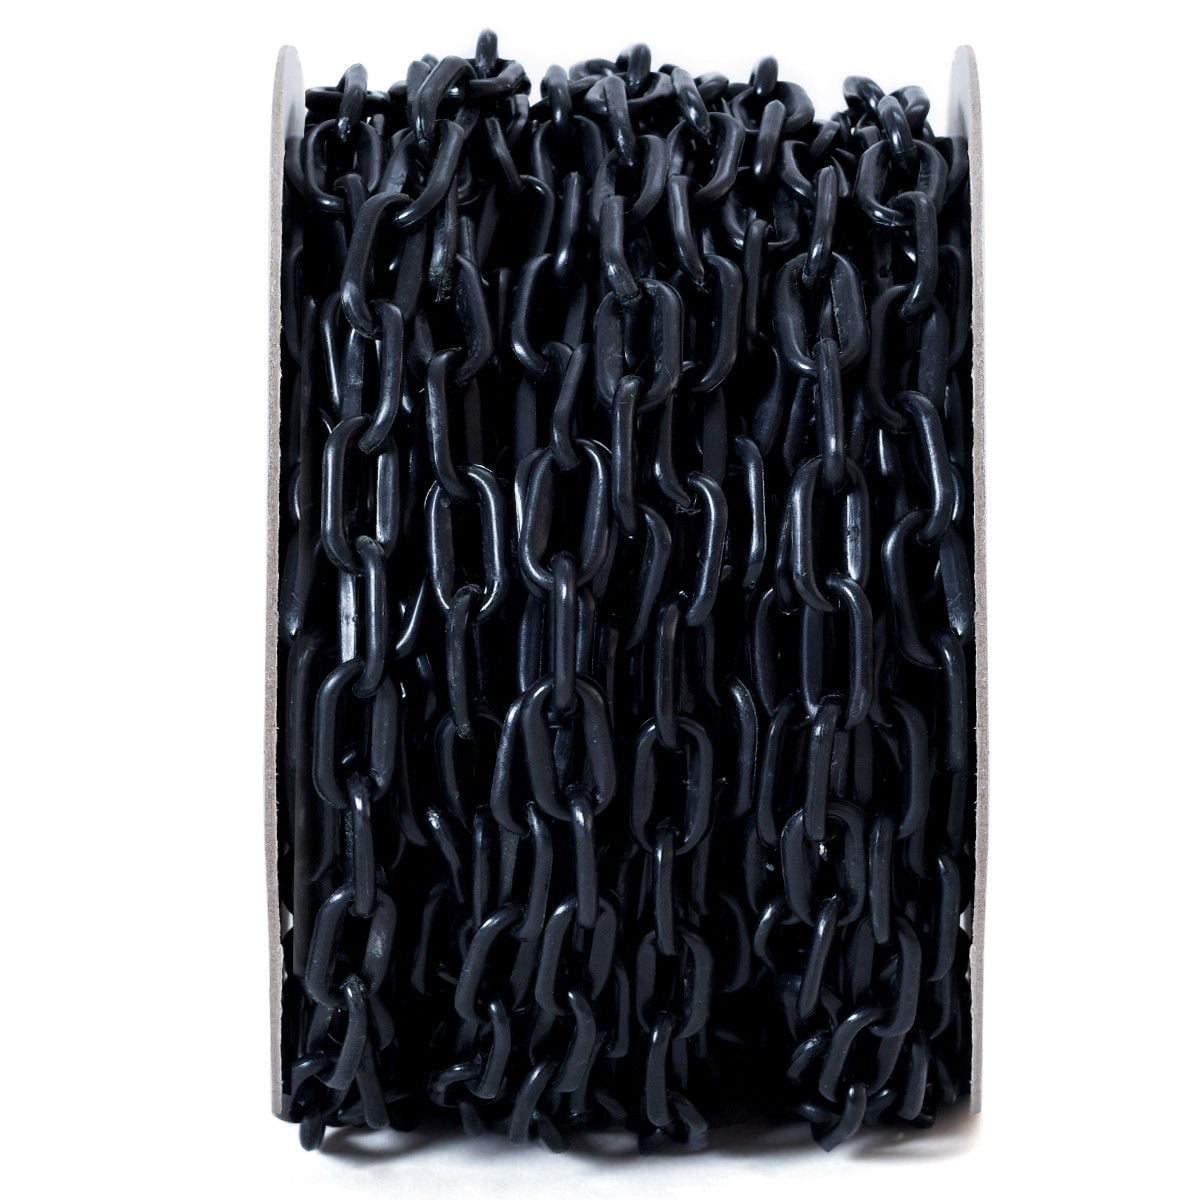 125 FT Crowd Control Plastic Chain Utility Safety Barrier Indoor& Outdoor Black 